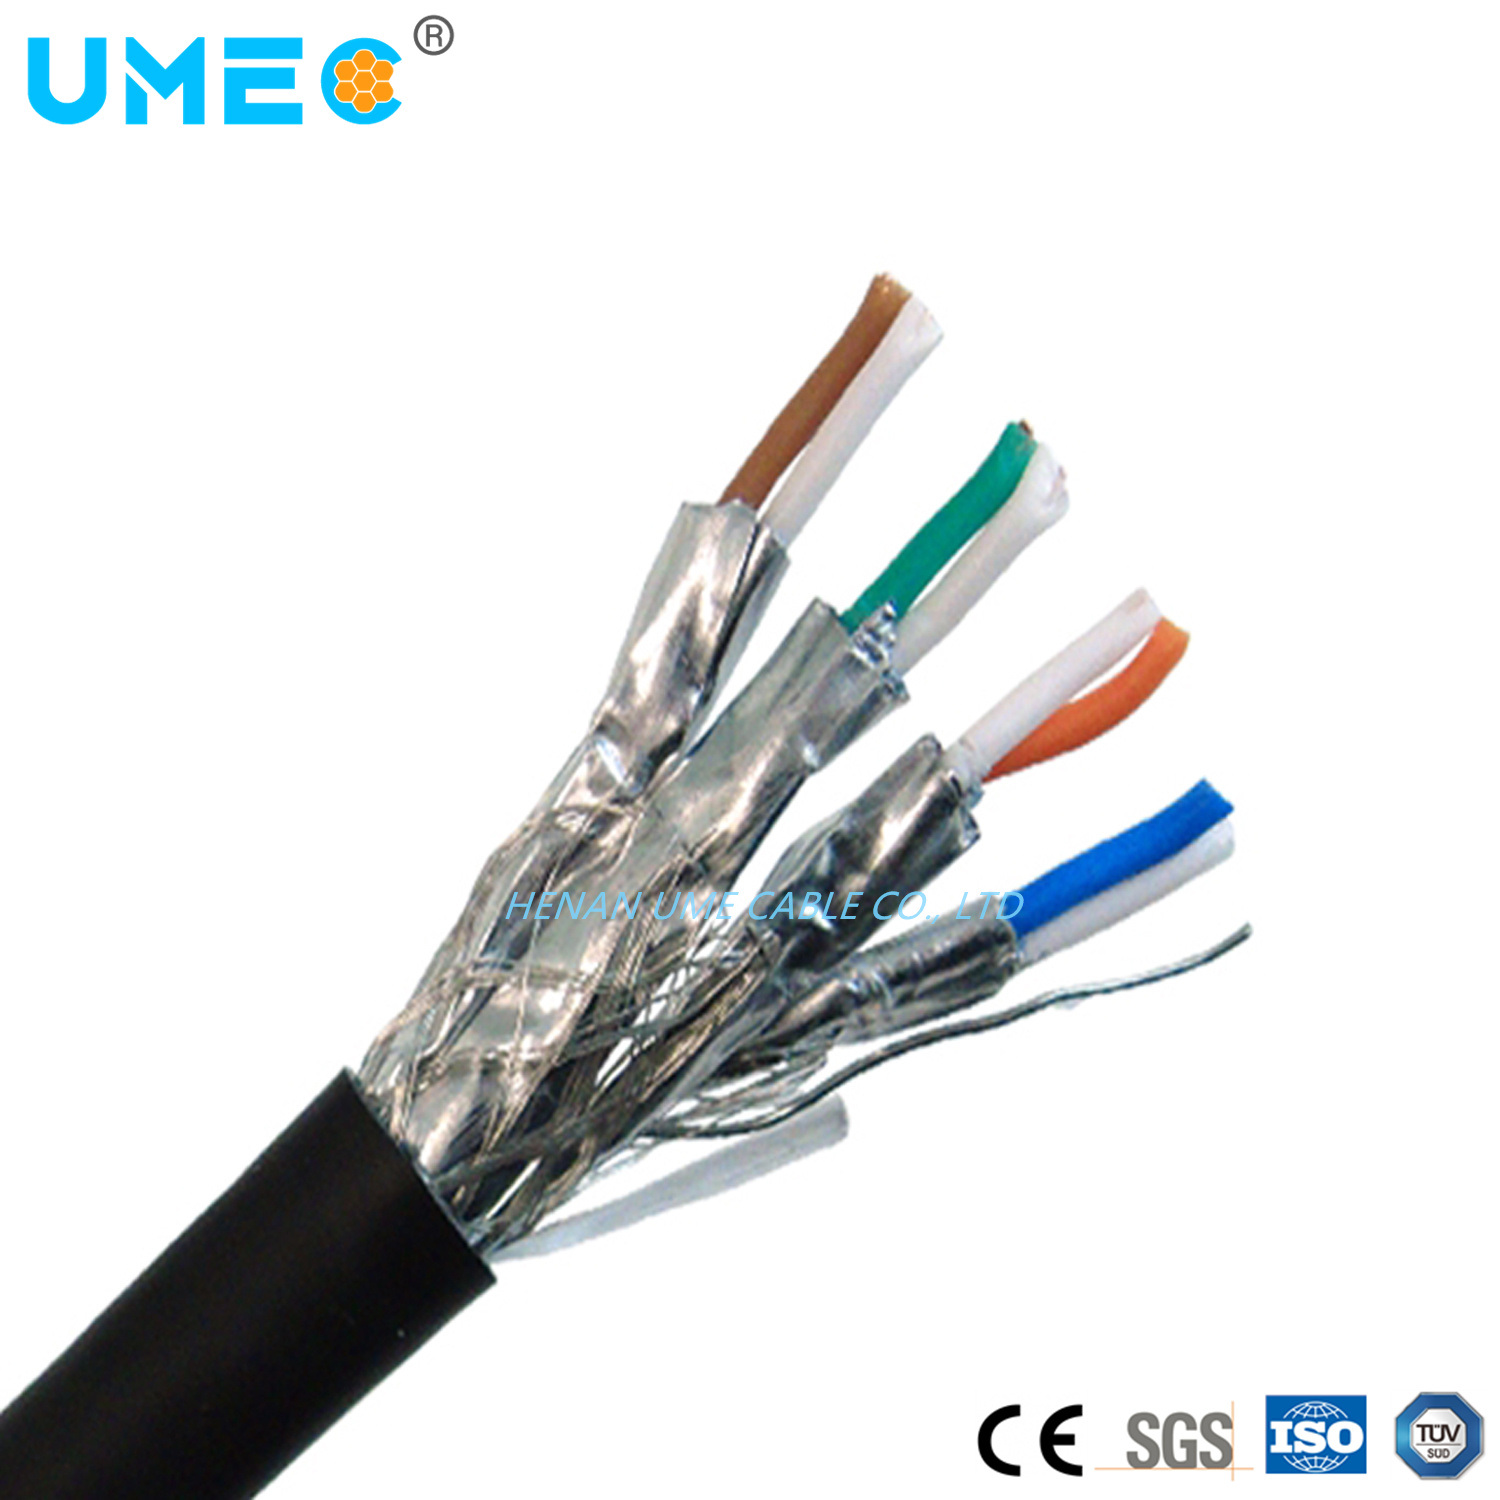 Instrument Speaker Cable BS Standard Computer Shielded Cable Cable for DSC System Djyvpr 2X1.5mm2